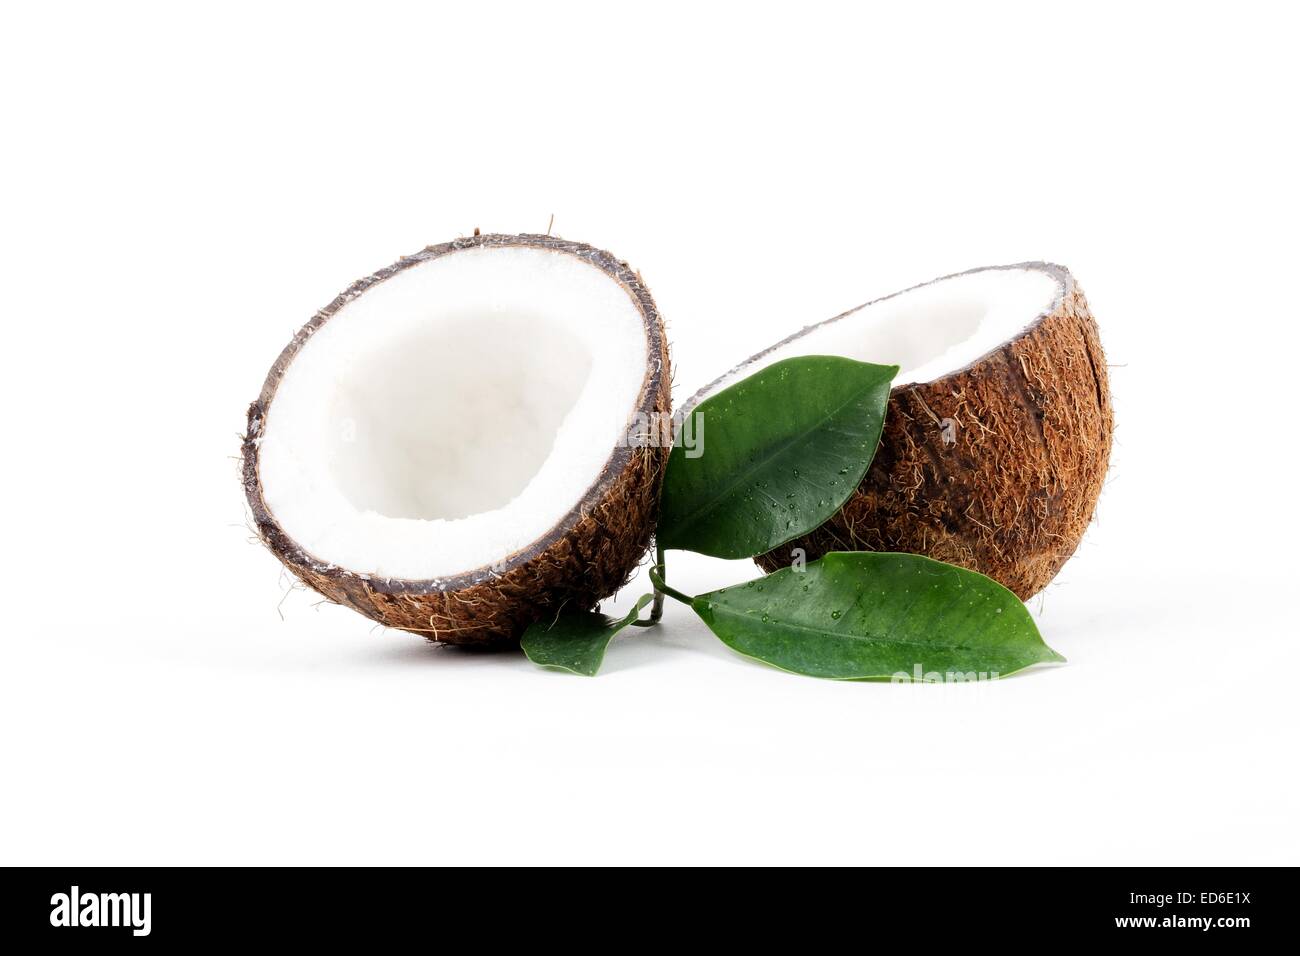 Coconut with leaves on a white background Stock Photo